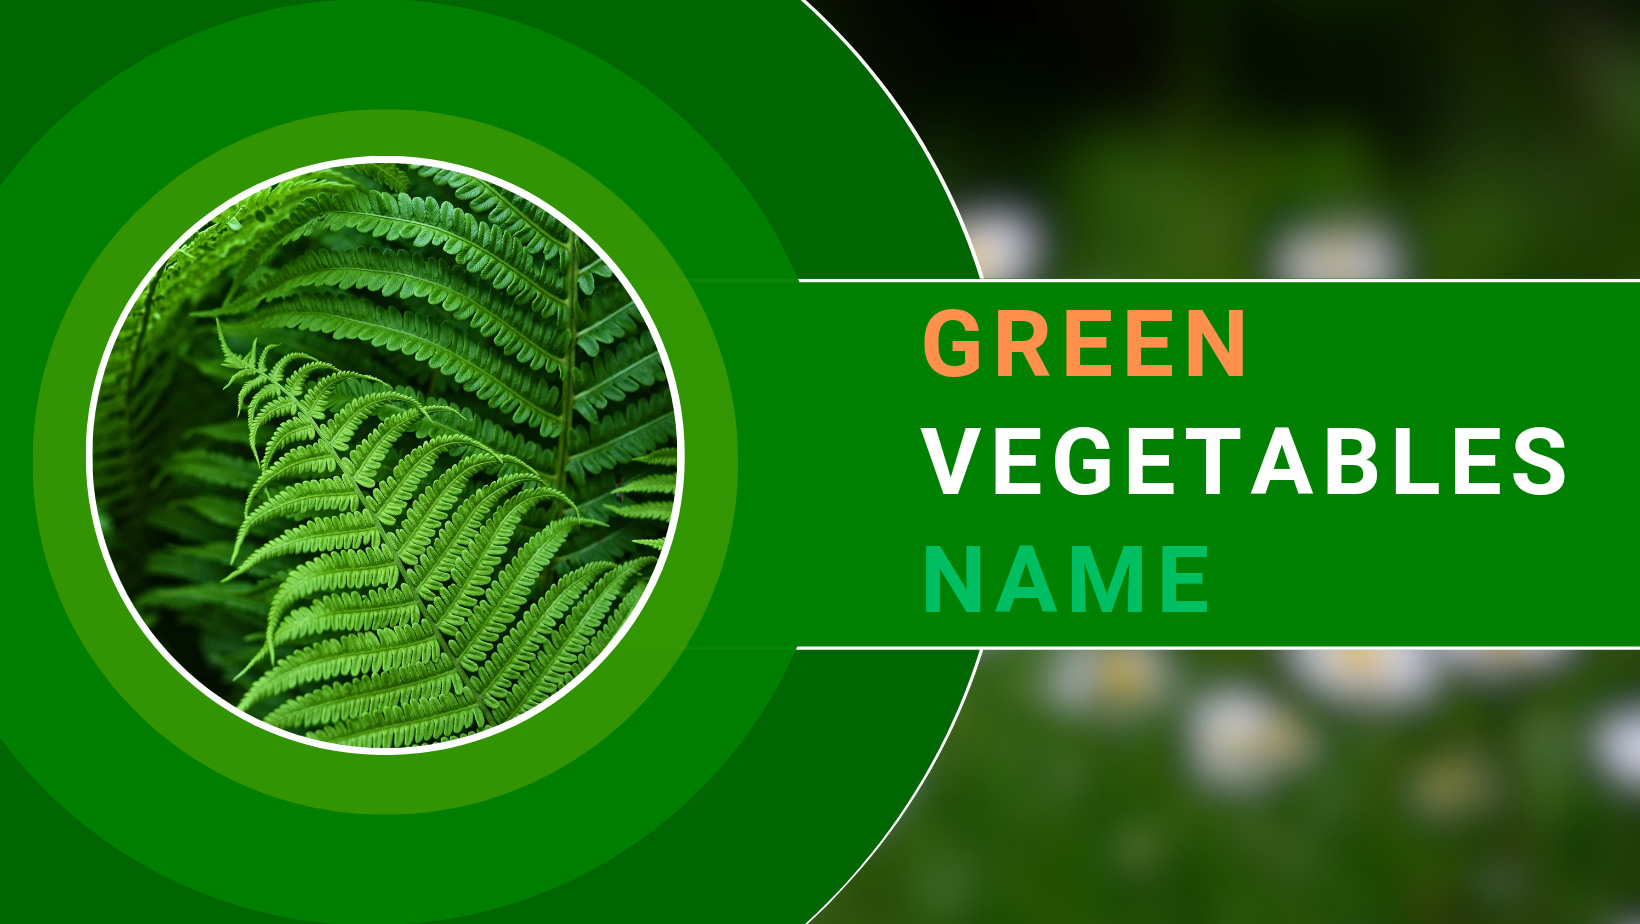 Green vegetables name in English